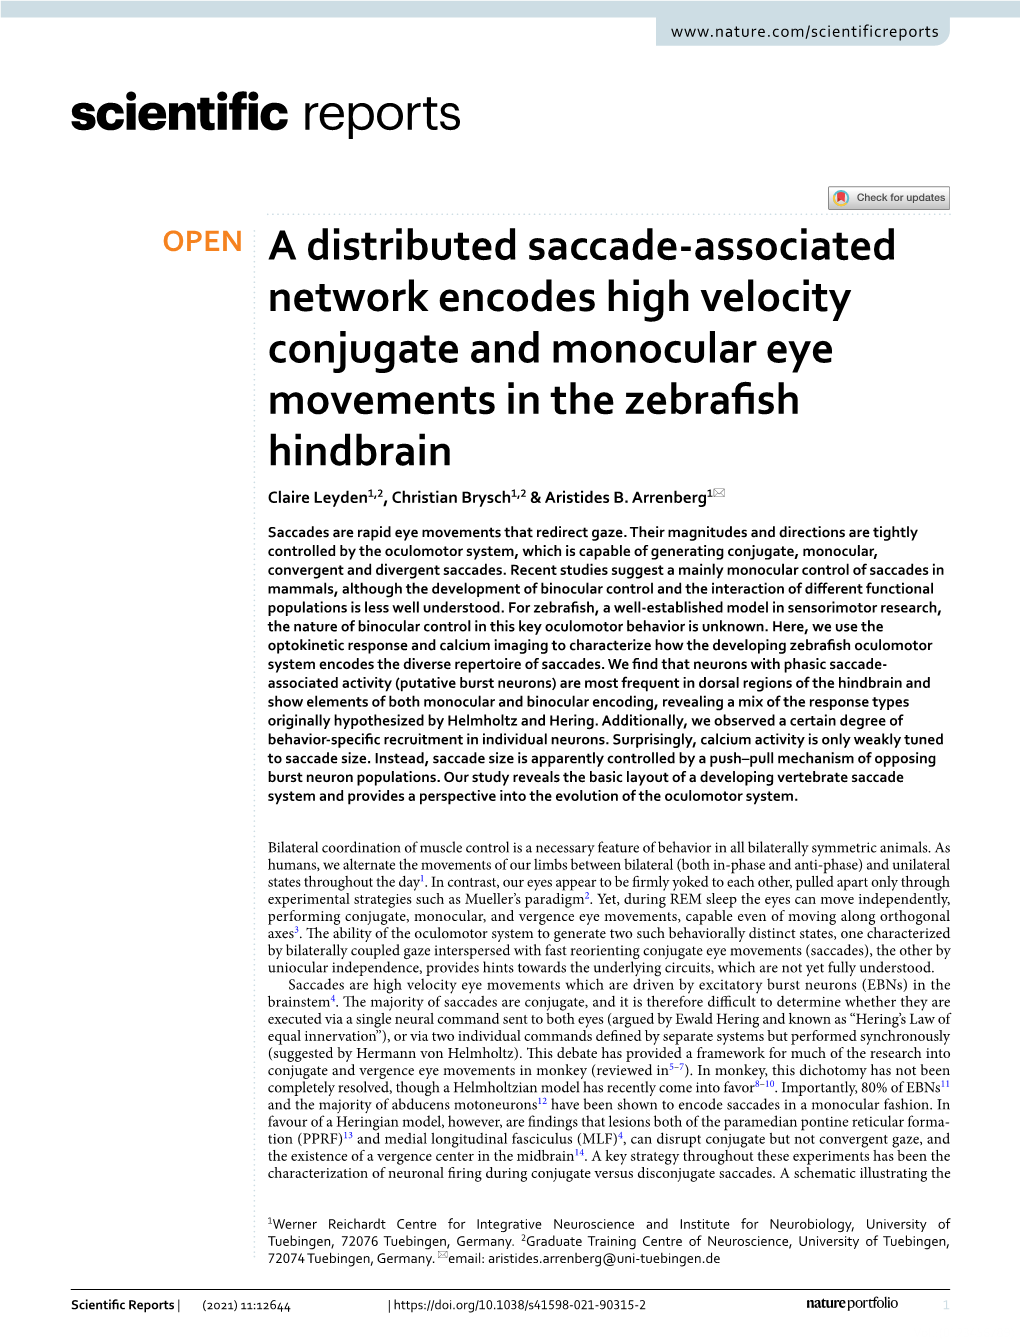 A Distributed Saccade-Associated Network Encodes High Velocity